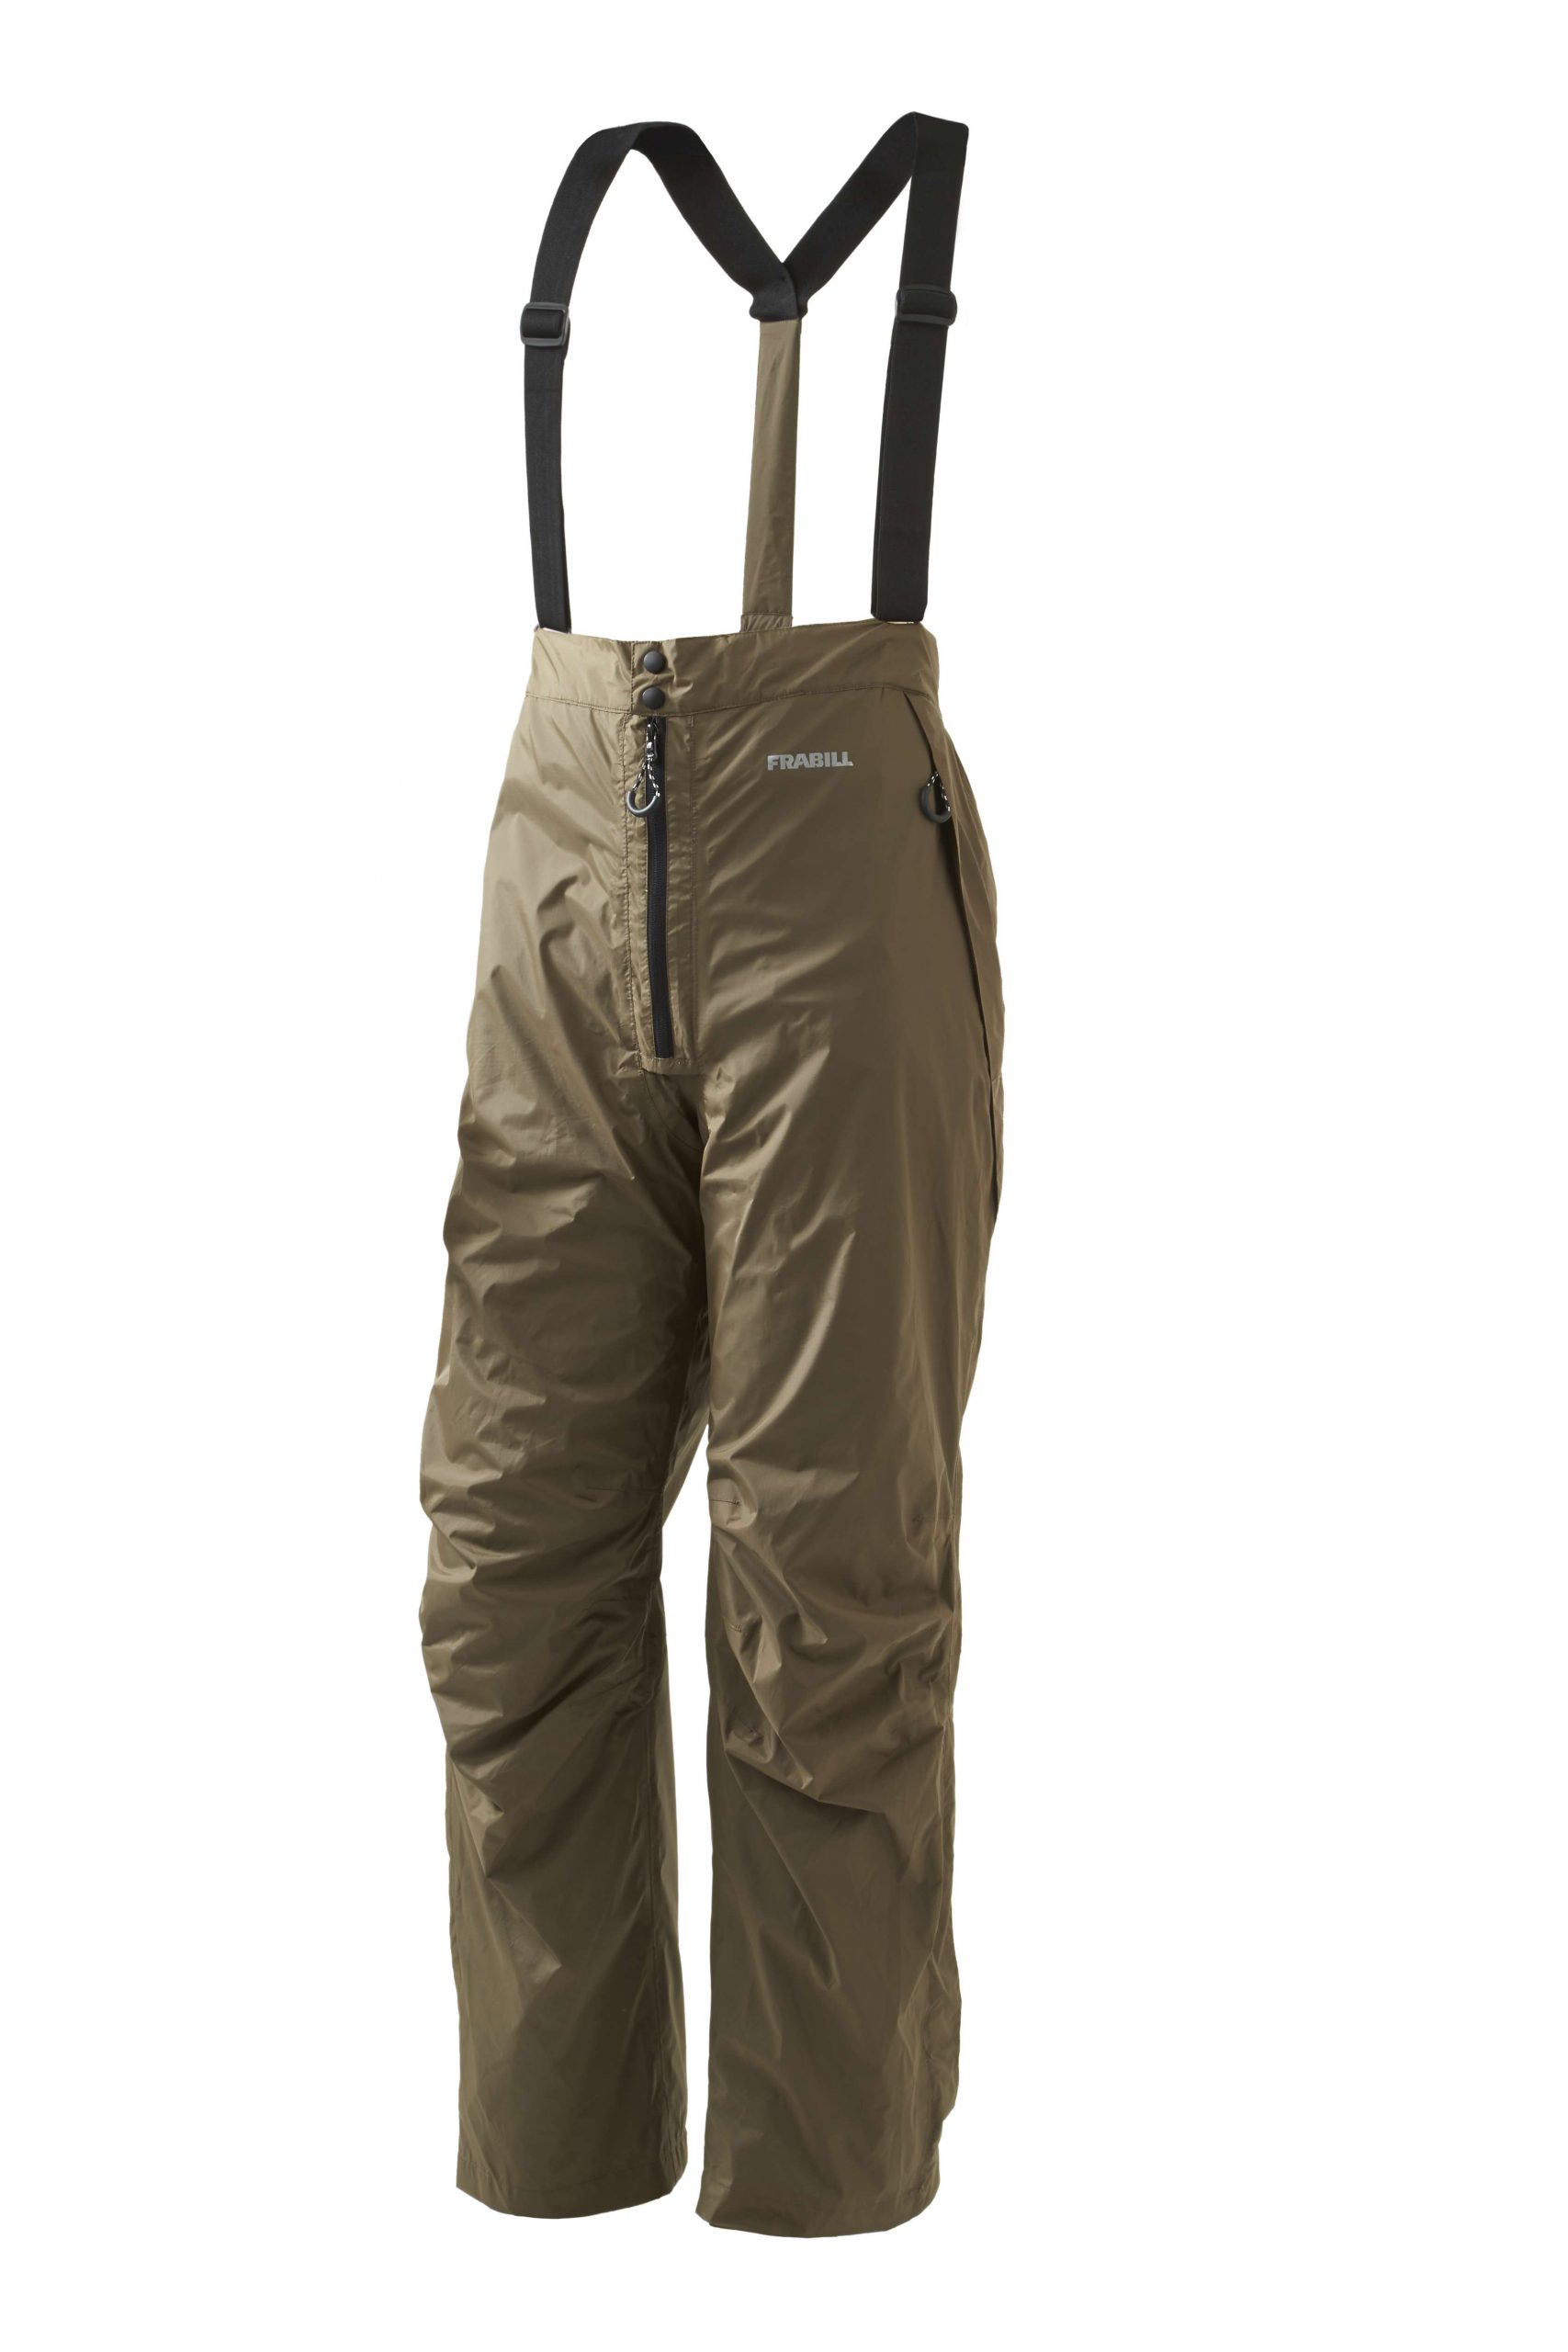 <b>Frabill</b><br>	Stow Series Pants<br>				A two layer waterproof, windproof, breathable light weight rip-stop shell is treated with 3M Scotchgard water repellant. Comes with a removable, full elastic shoulder straps, and a gusset behind the front zipper provides superior waterproof protection. Packable in a convenient stow pocket.